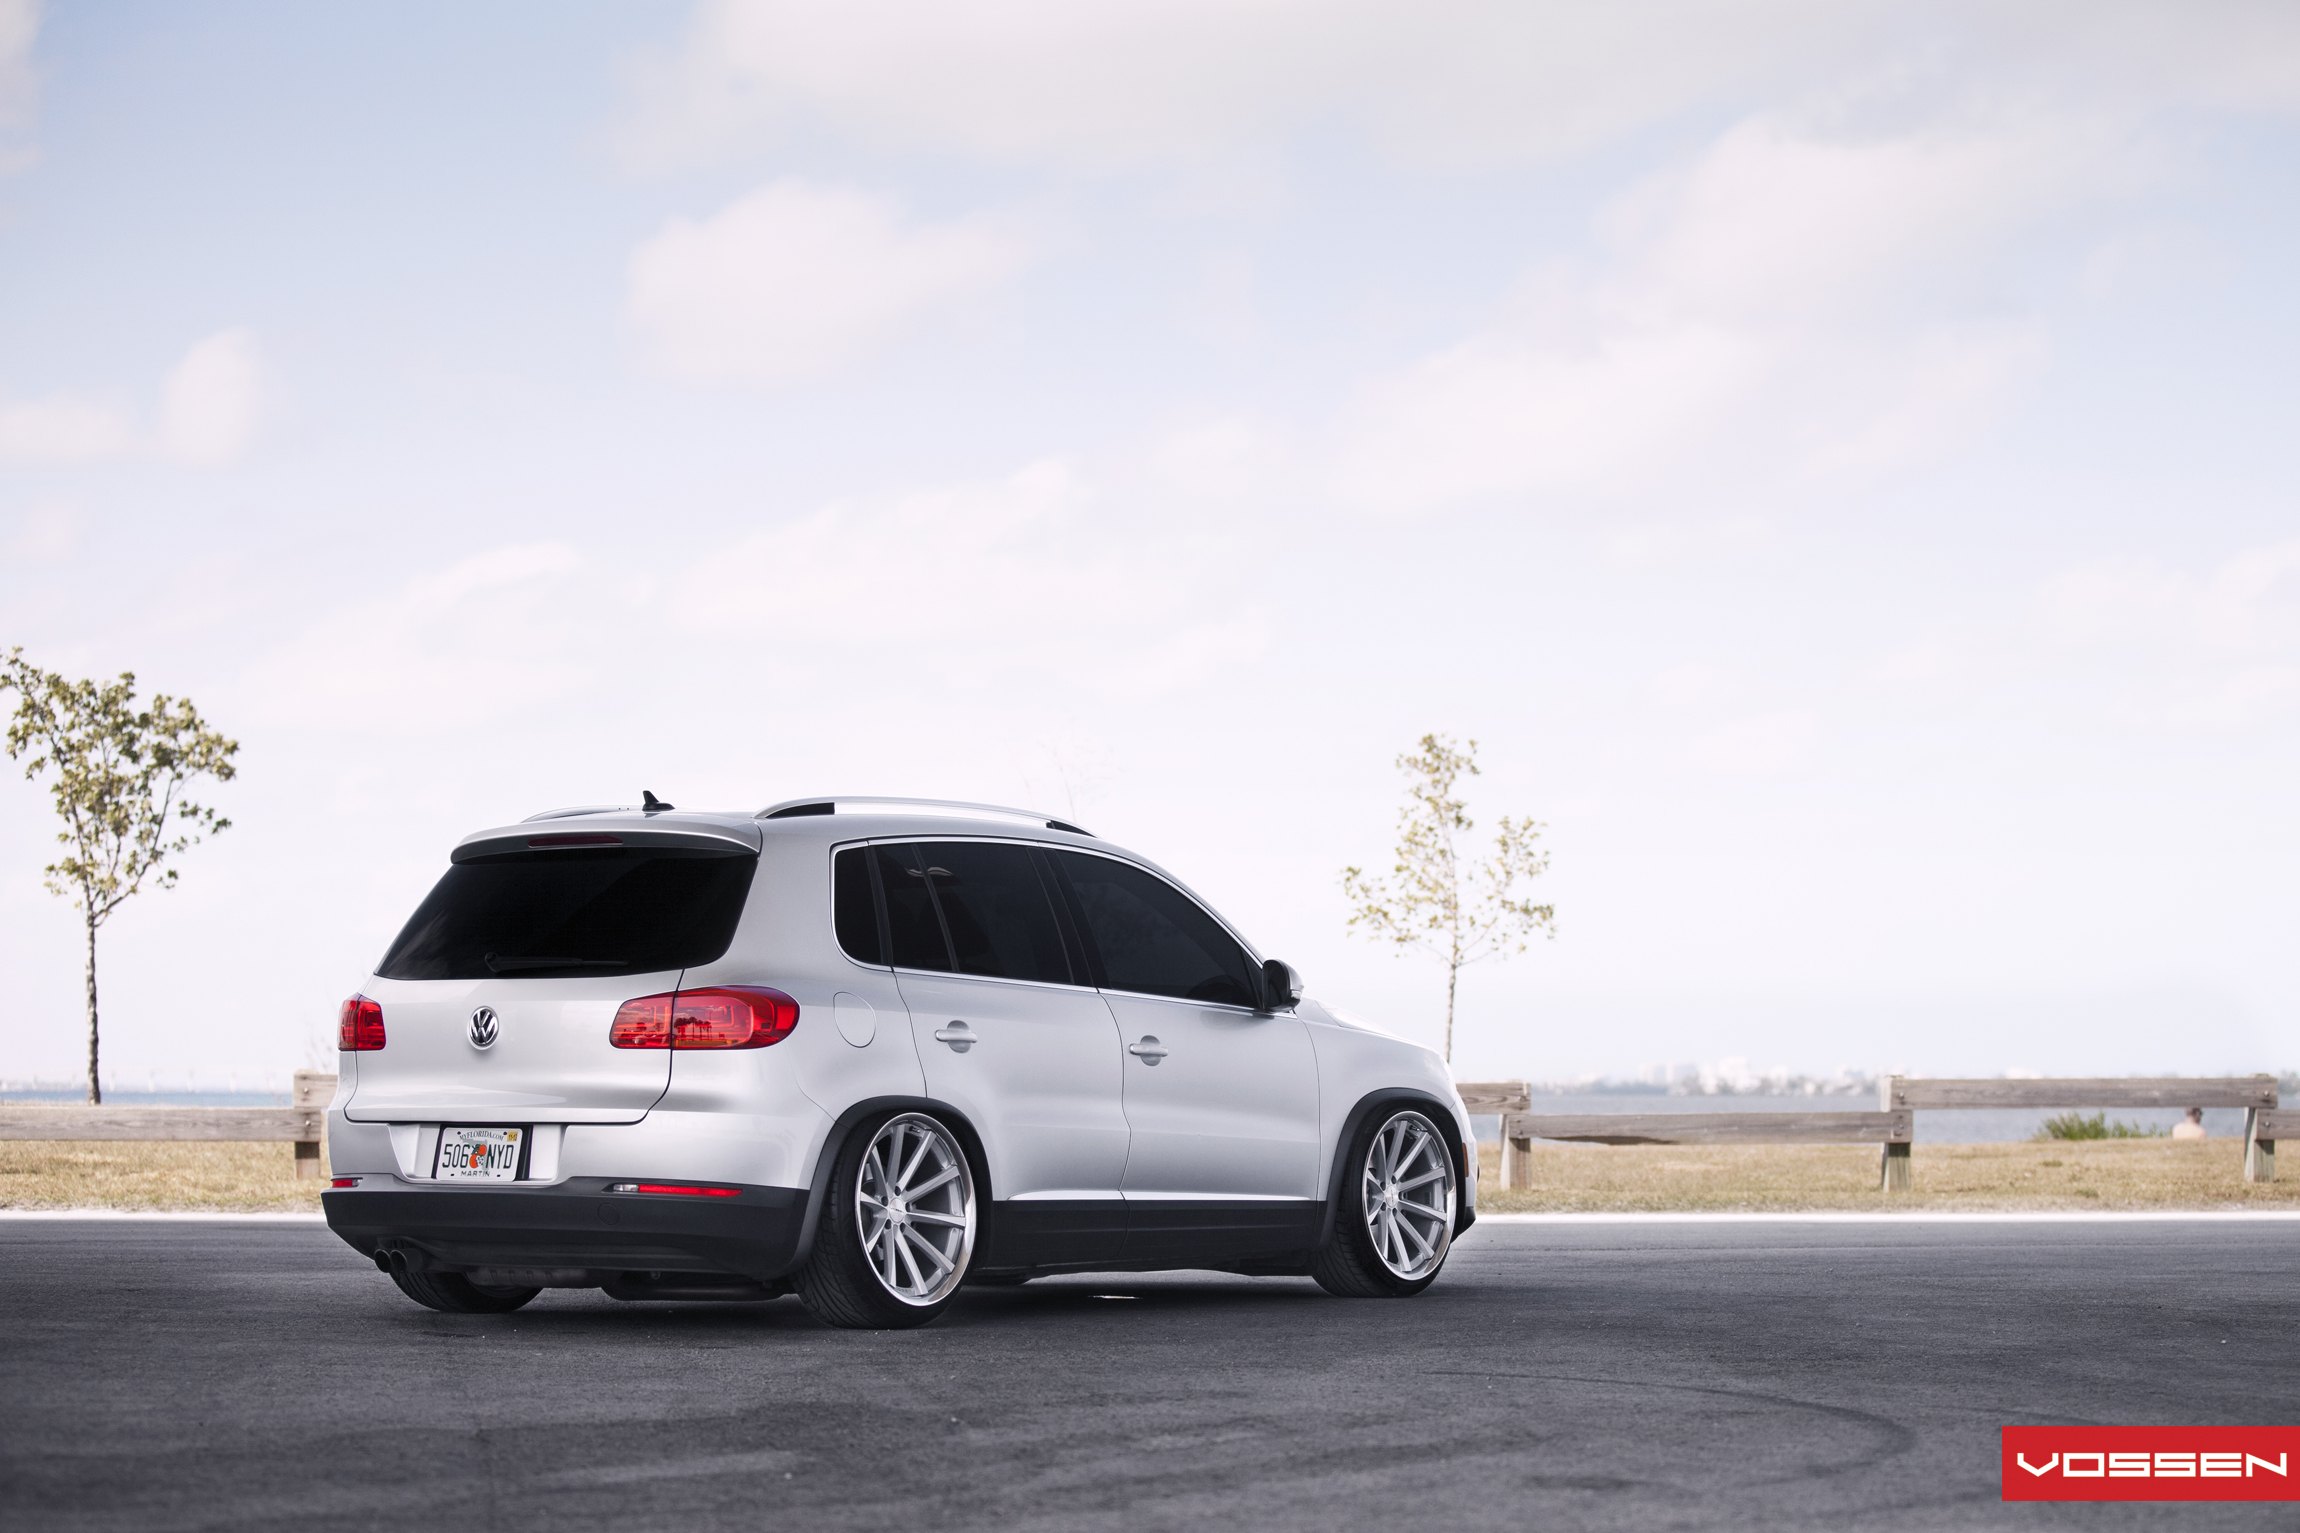 Roofline Spoiler with Light on Silver VW Tiguan - Photo by Vossen